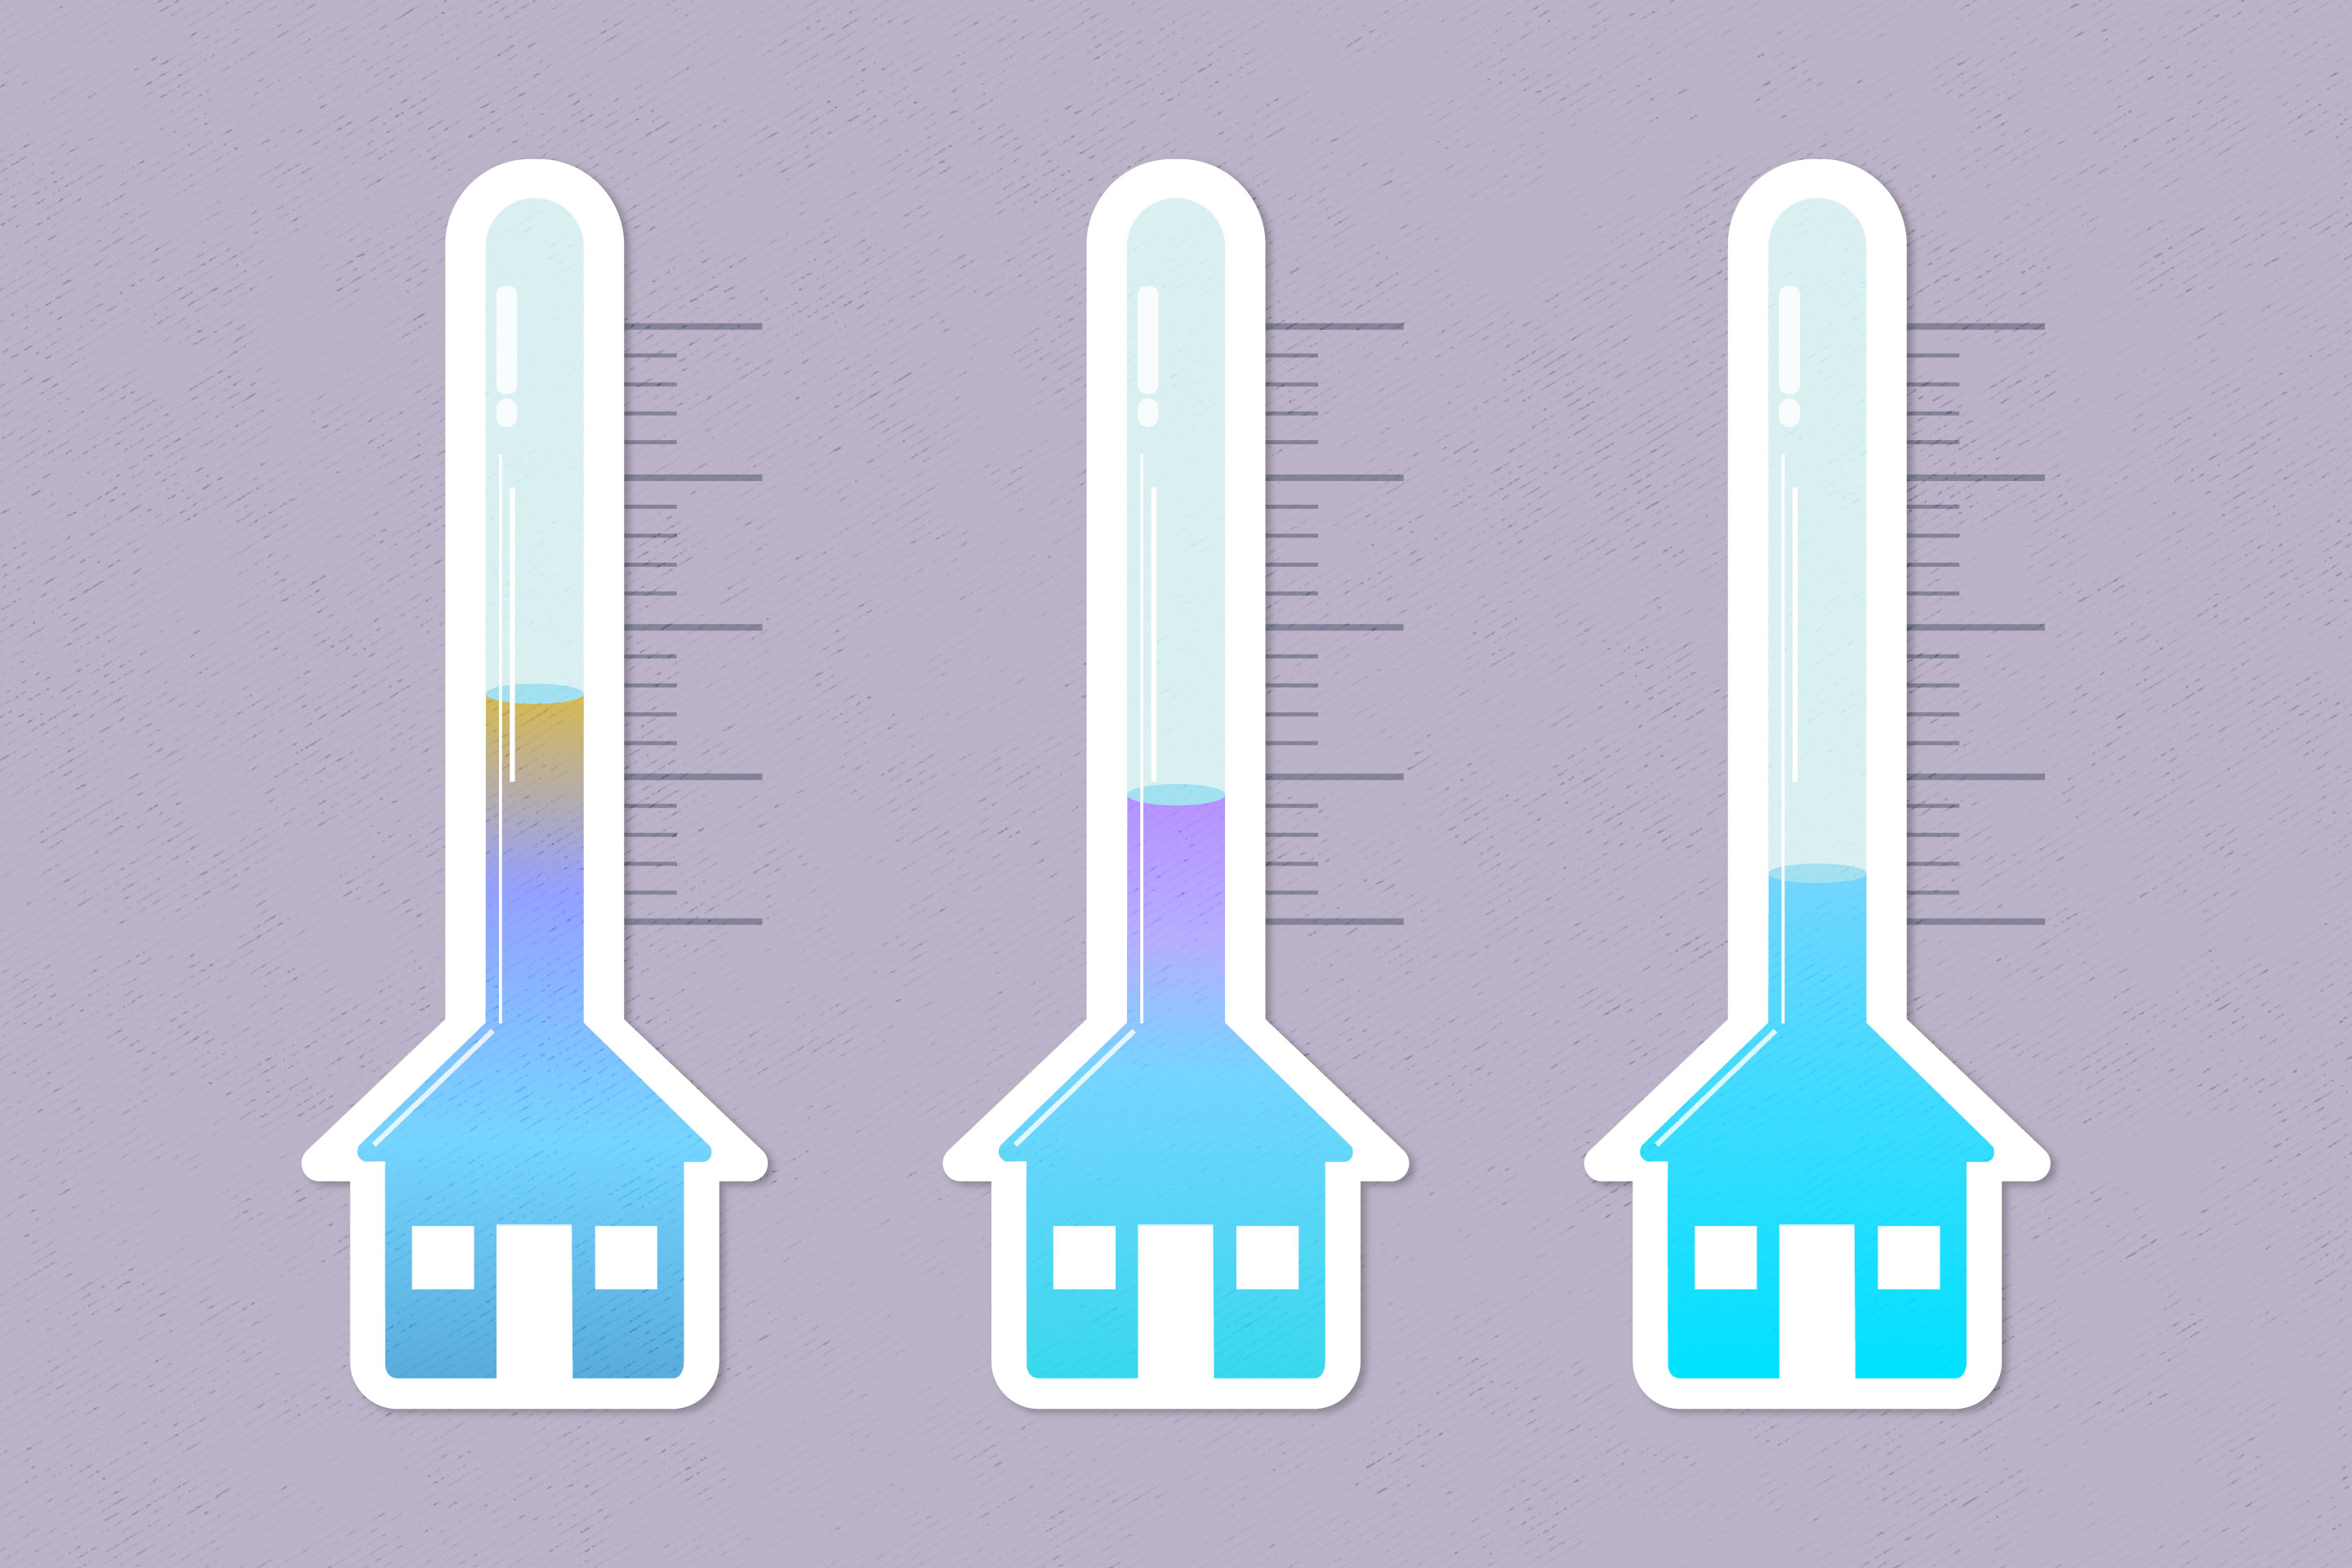 4 Signs the Hot Housing Market Is Finally Starting to Cool